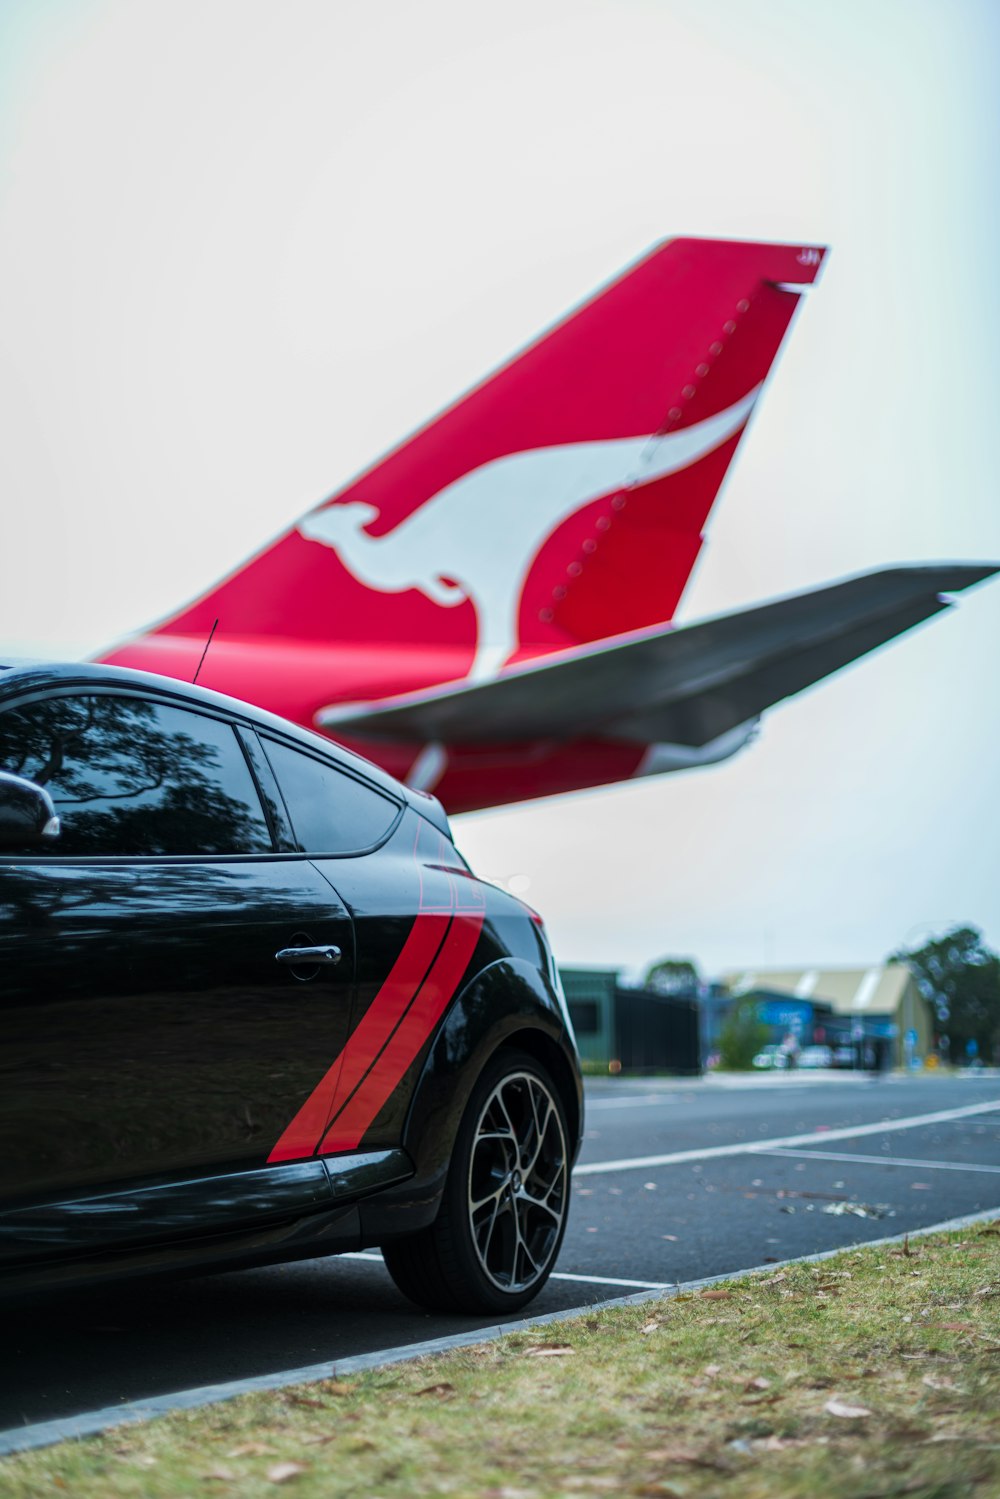 red and white airplane behind a black hatchback